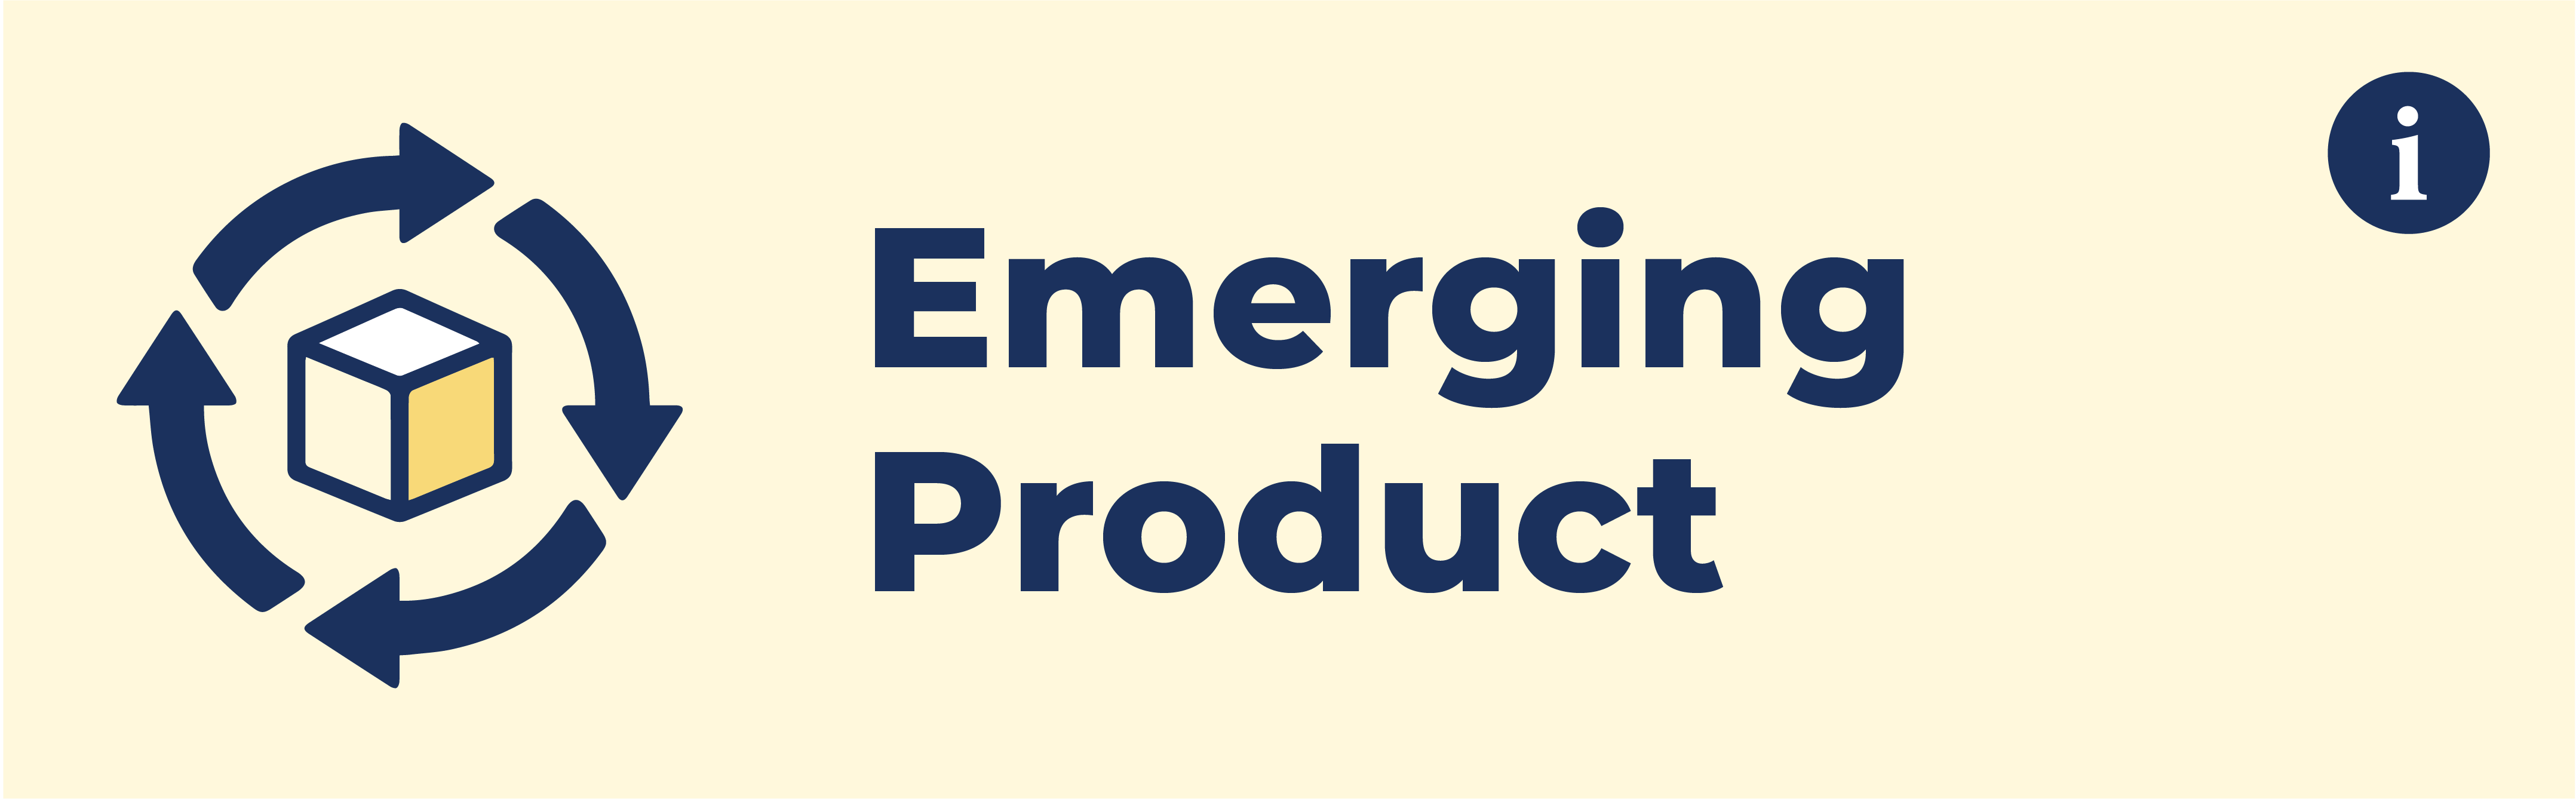 Emerging Product